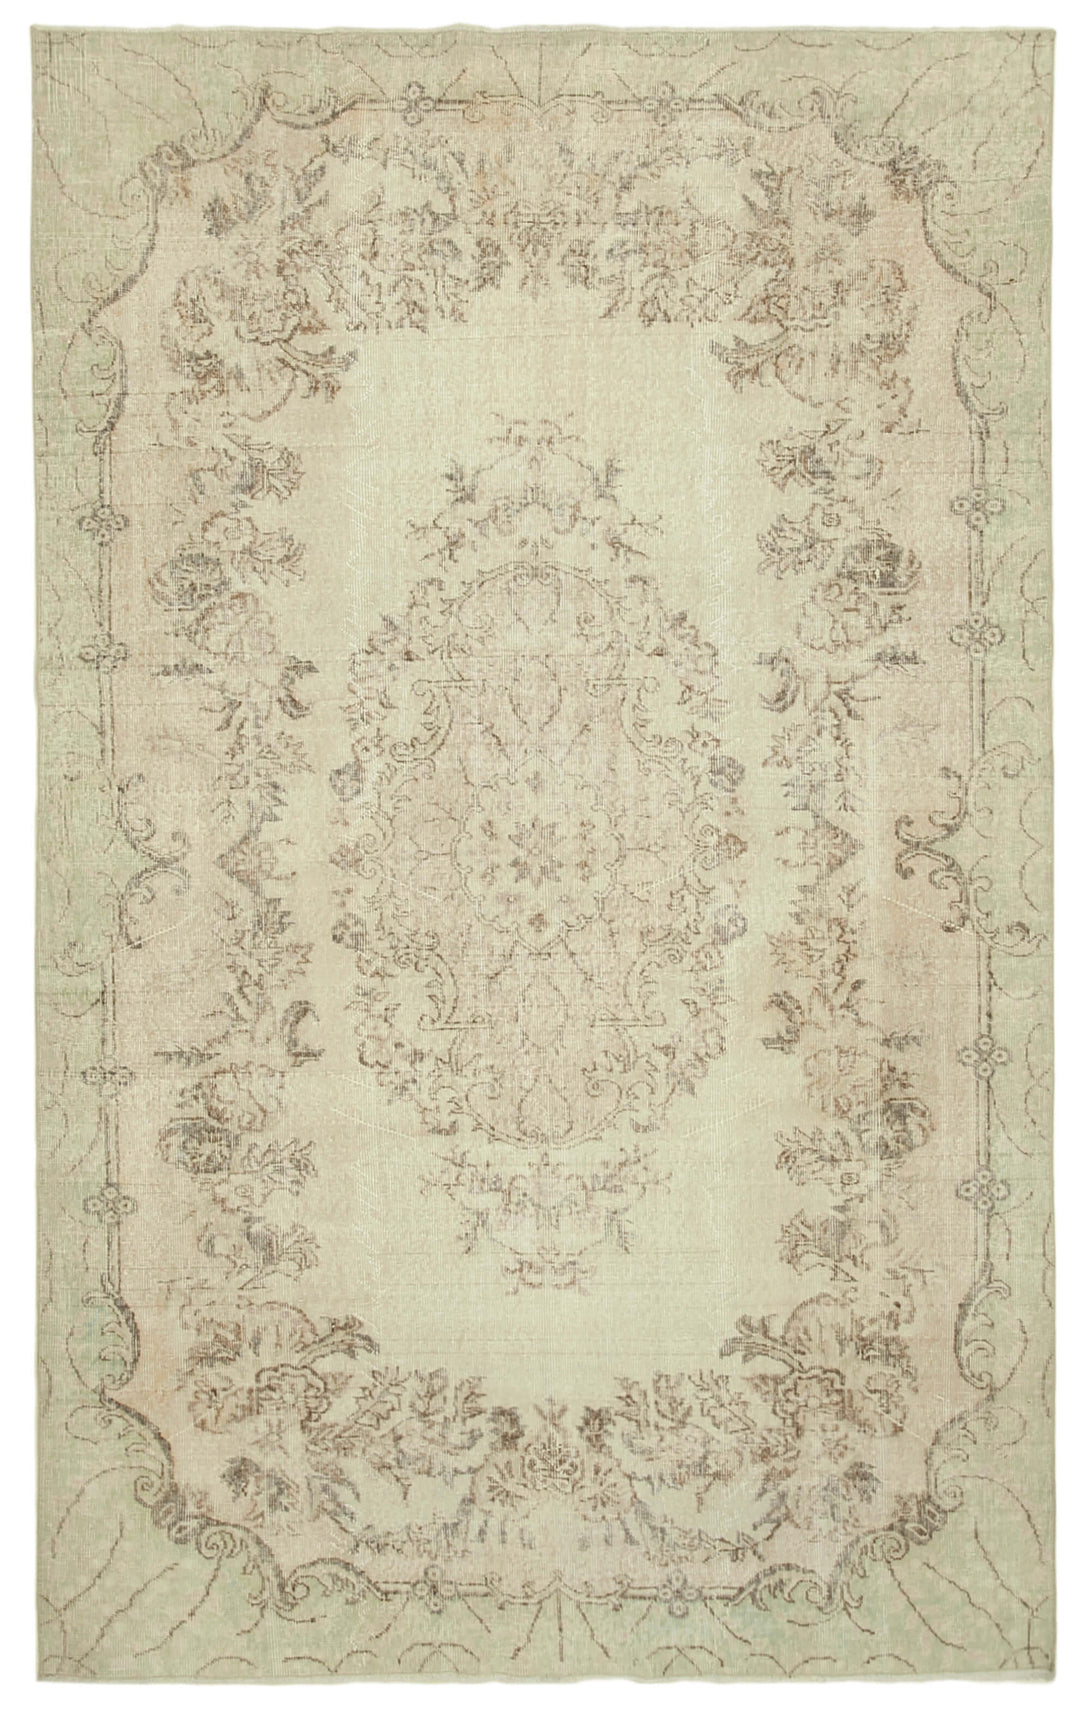 Handmade White Wash Area Rug > Design# OL-AC-39301 > Size: 6'-5" x 9'-11", Carpet Culture Rugs, Handmade Rugs, NYC Rugs, New Rugs, Shop Rugs, Rug Store, Outlet Rugs, SoHo Rugs, Rugs in USA